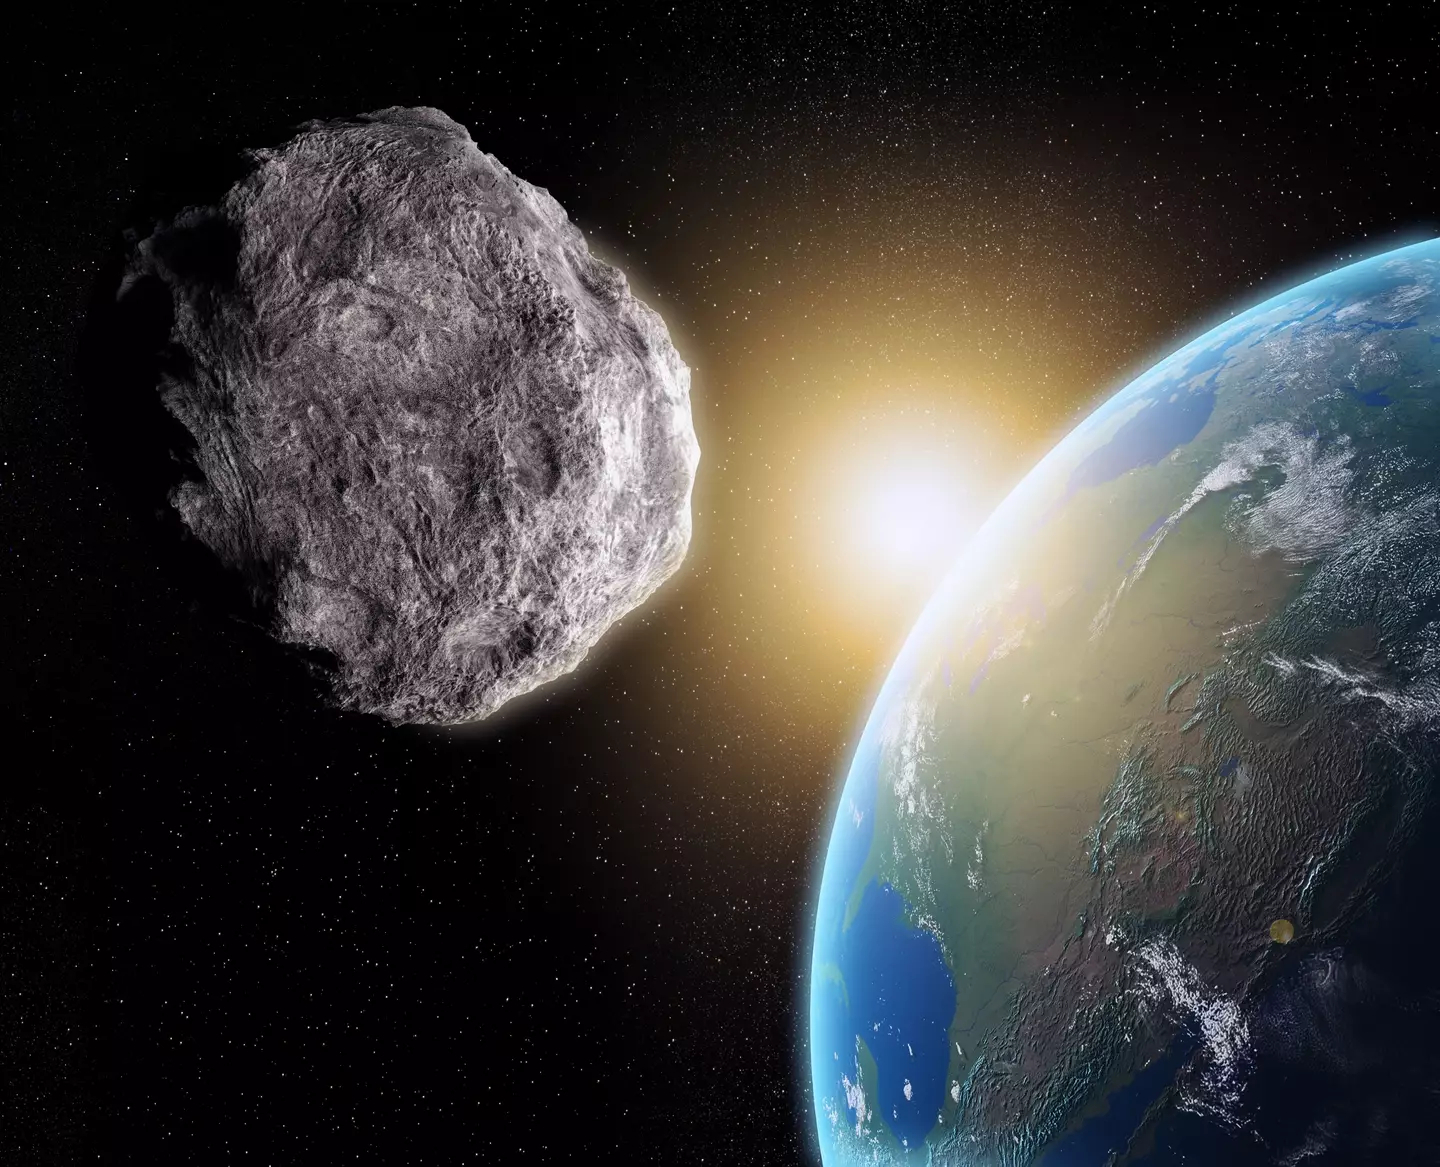 The asteroid is set to make a 'close pass' by Earth.